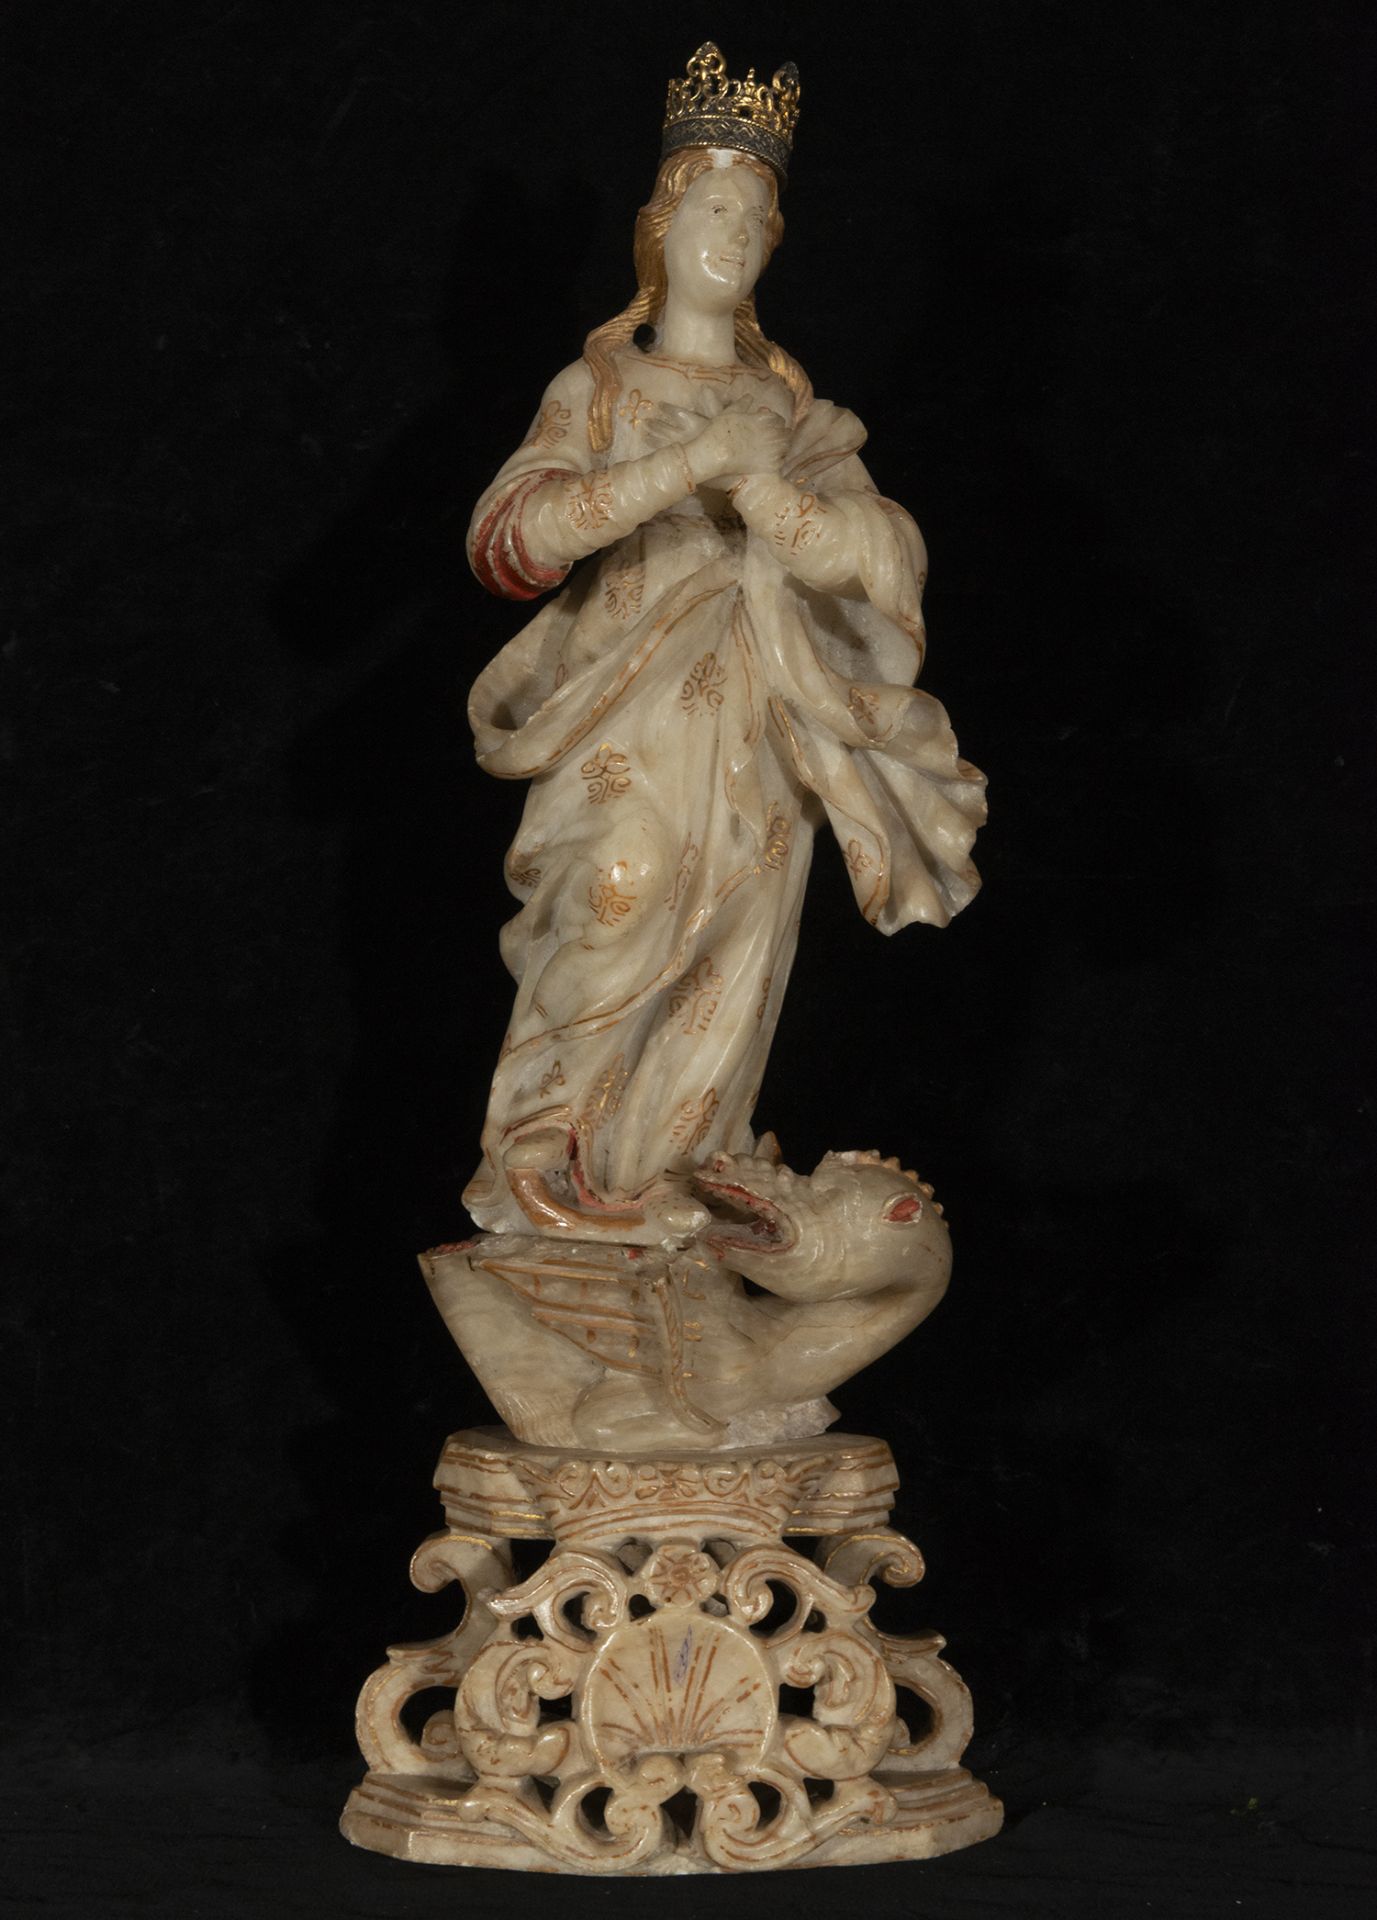 Magnificent Immaculate Virgin of Trapani in Alabaster from the end of the 17th century beginning of 